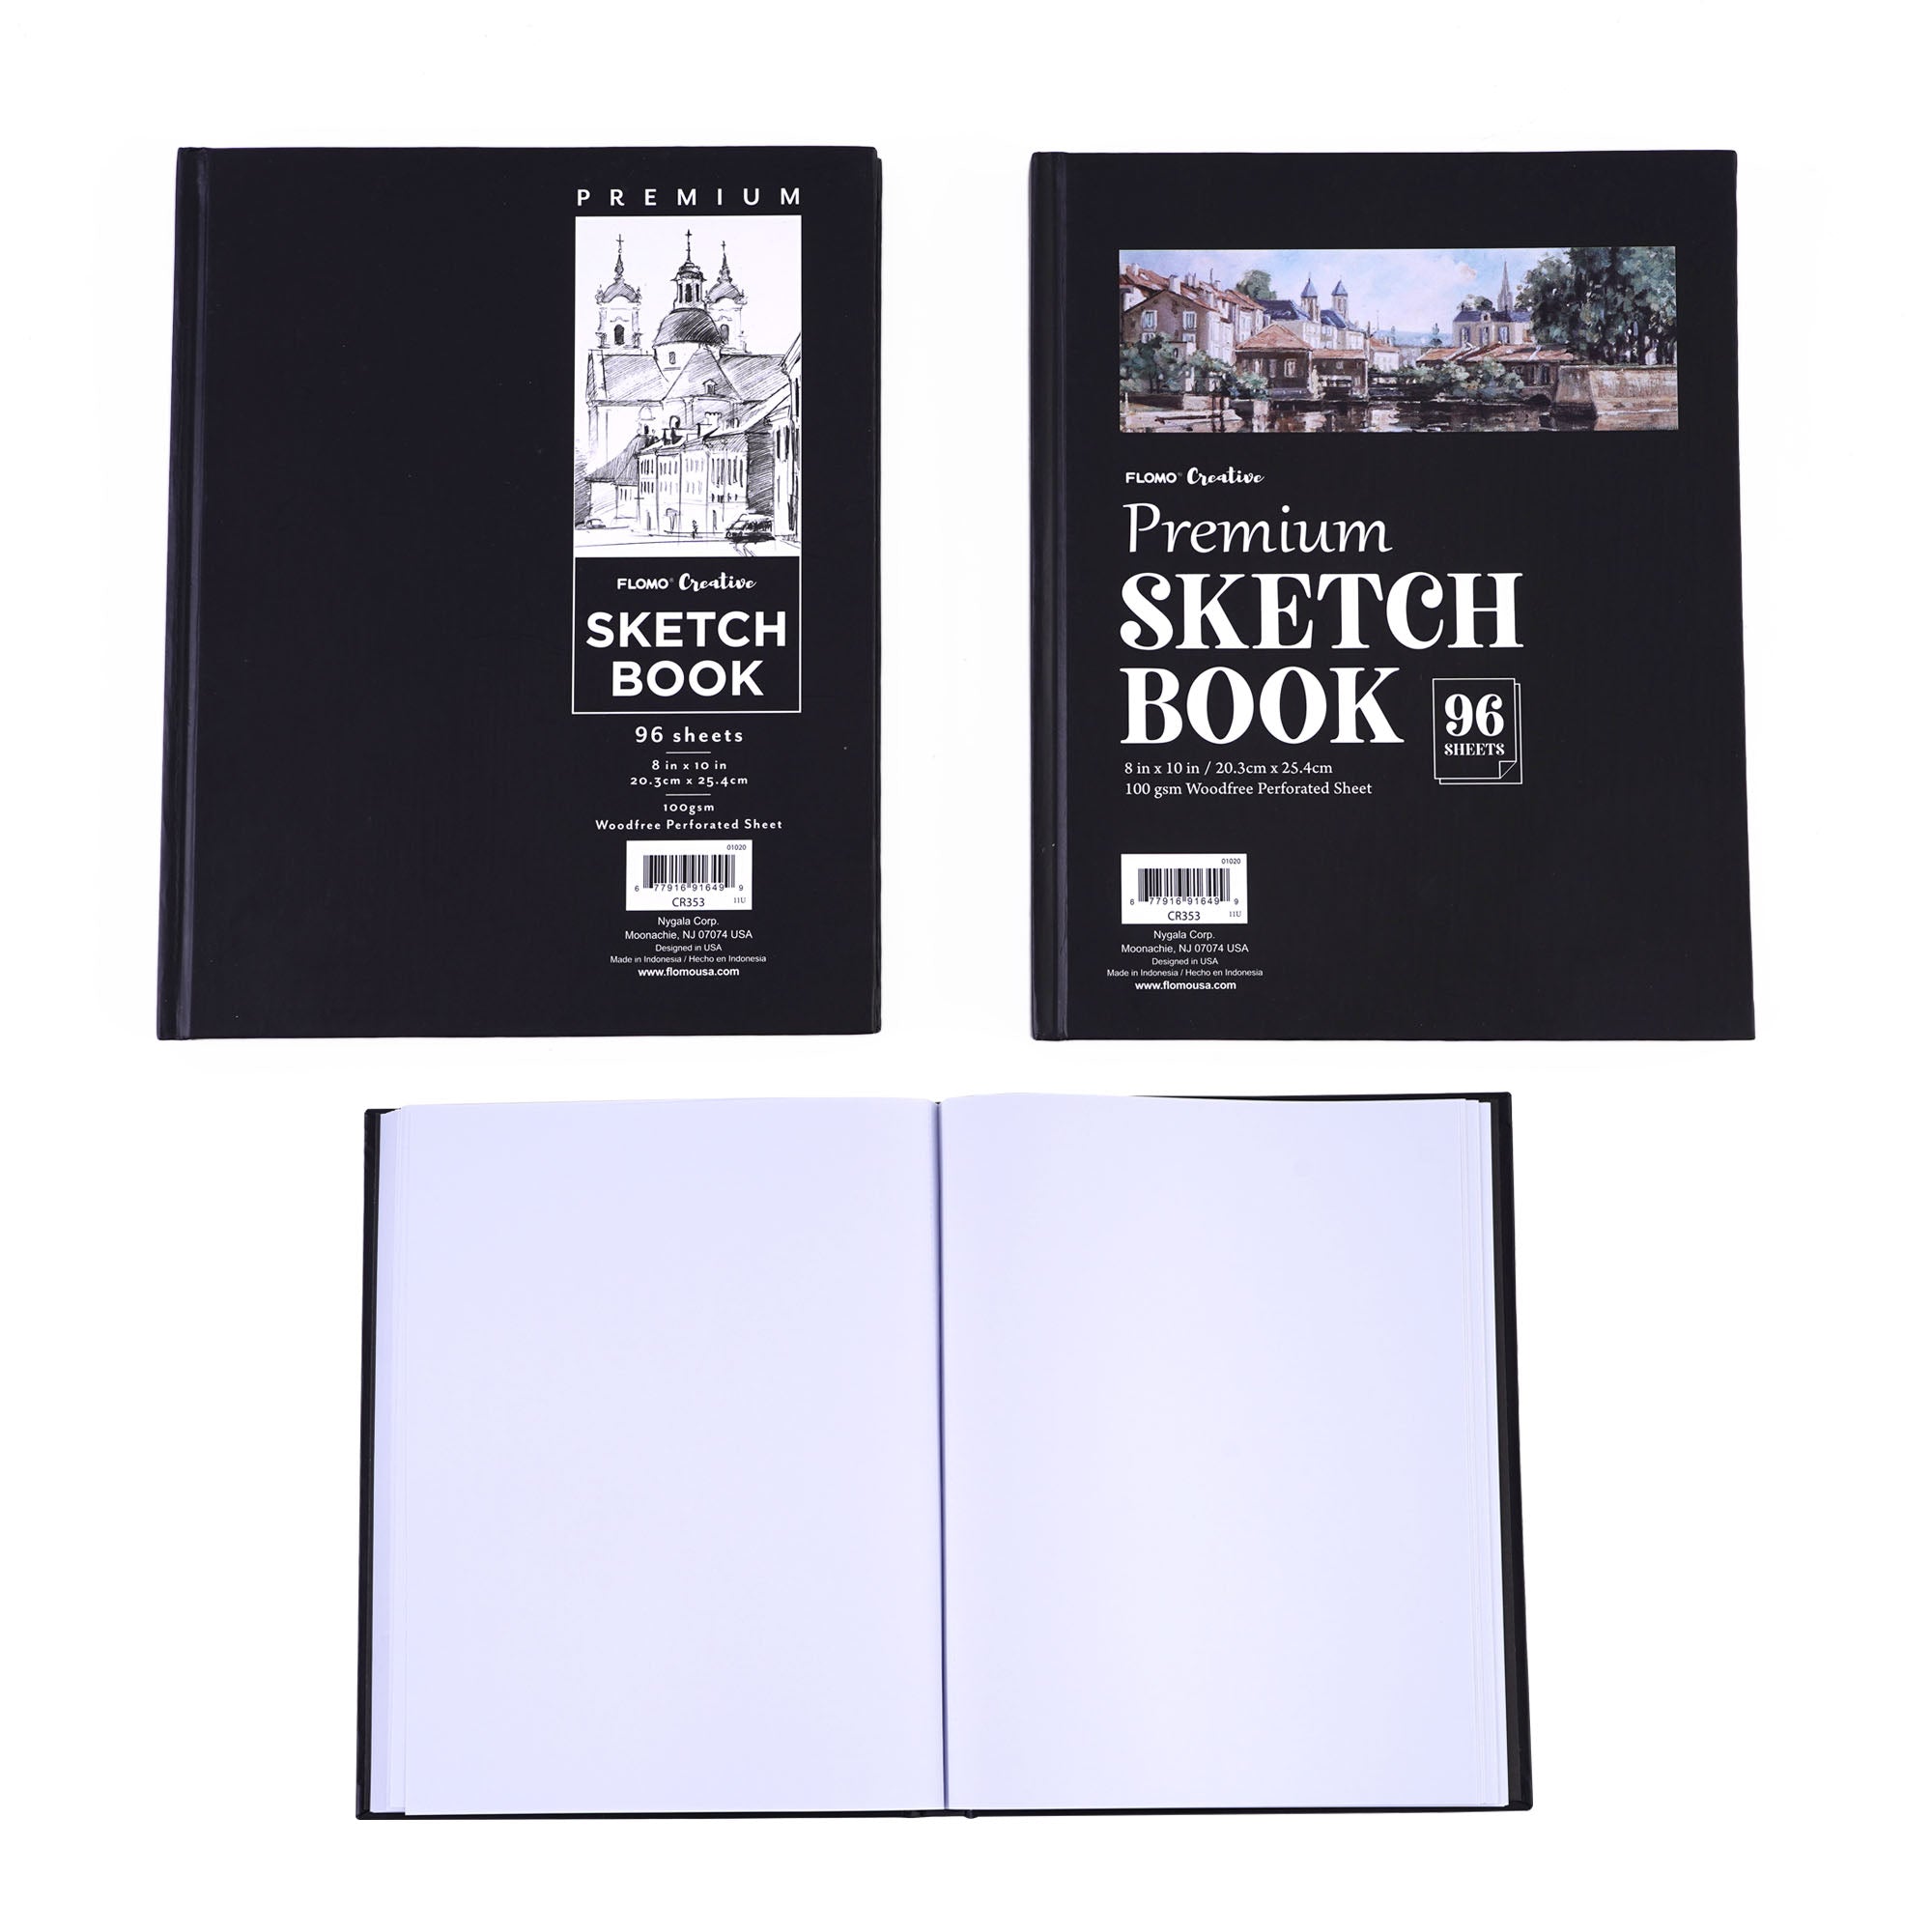 Creative sketching  Large Sketchbook ever  800 page for drawing with  pencils Big Sketch book for doodling Biggest Sketch pads 8  x 10  800   Cover design wall texture background  Amazonin Books